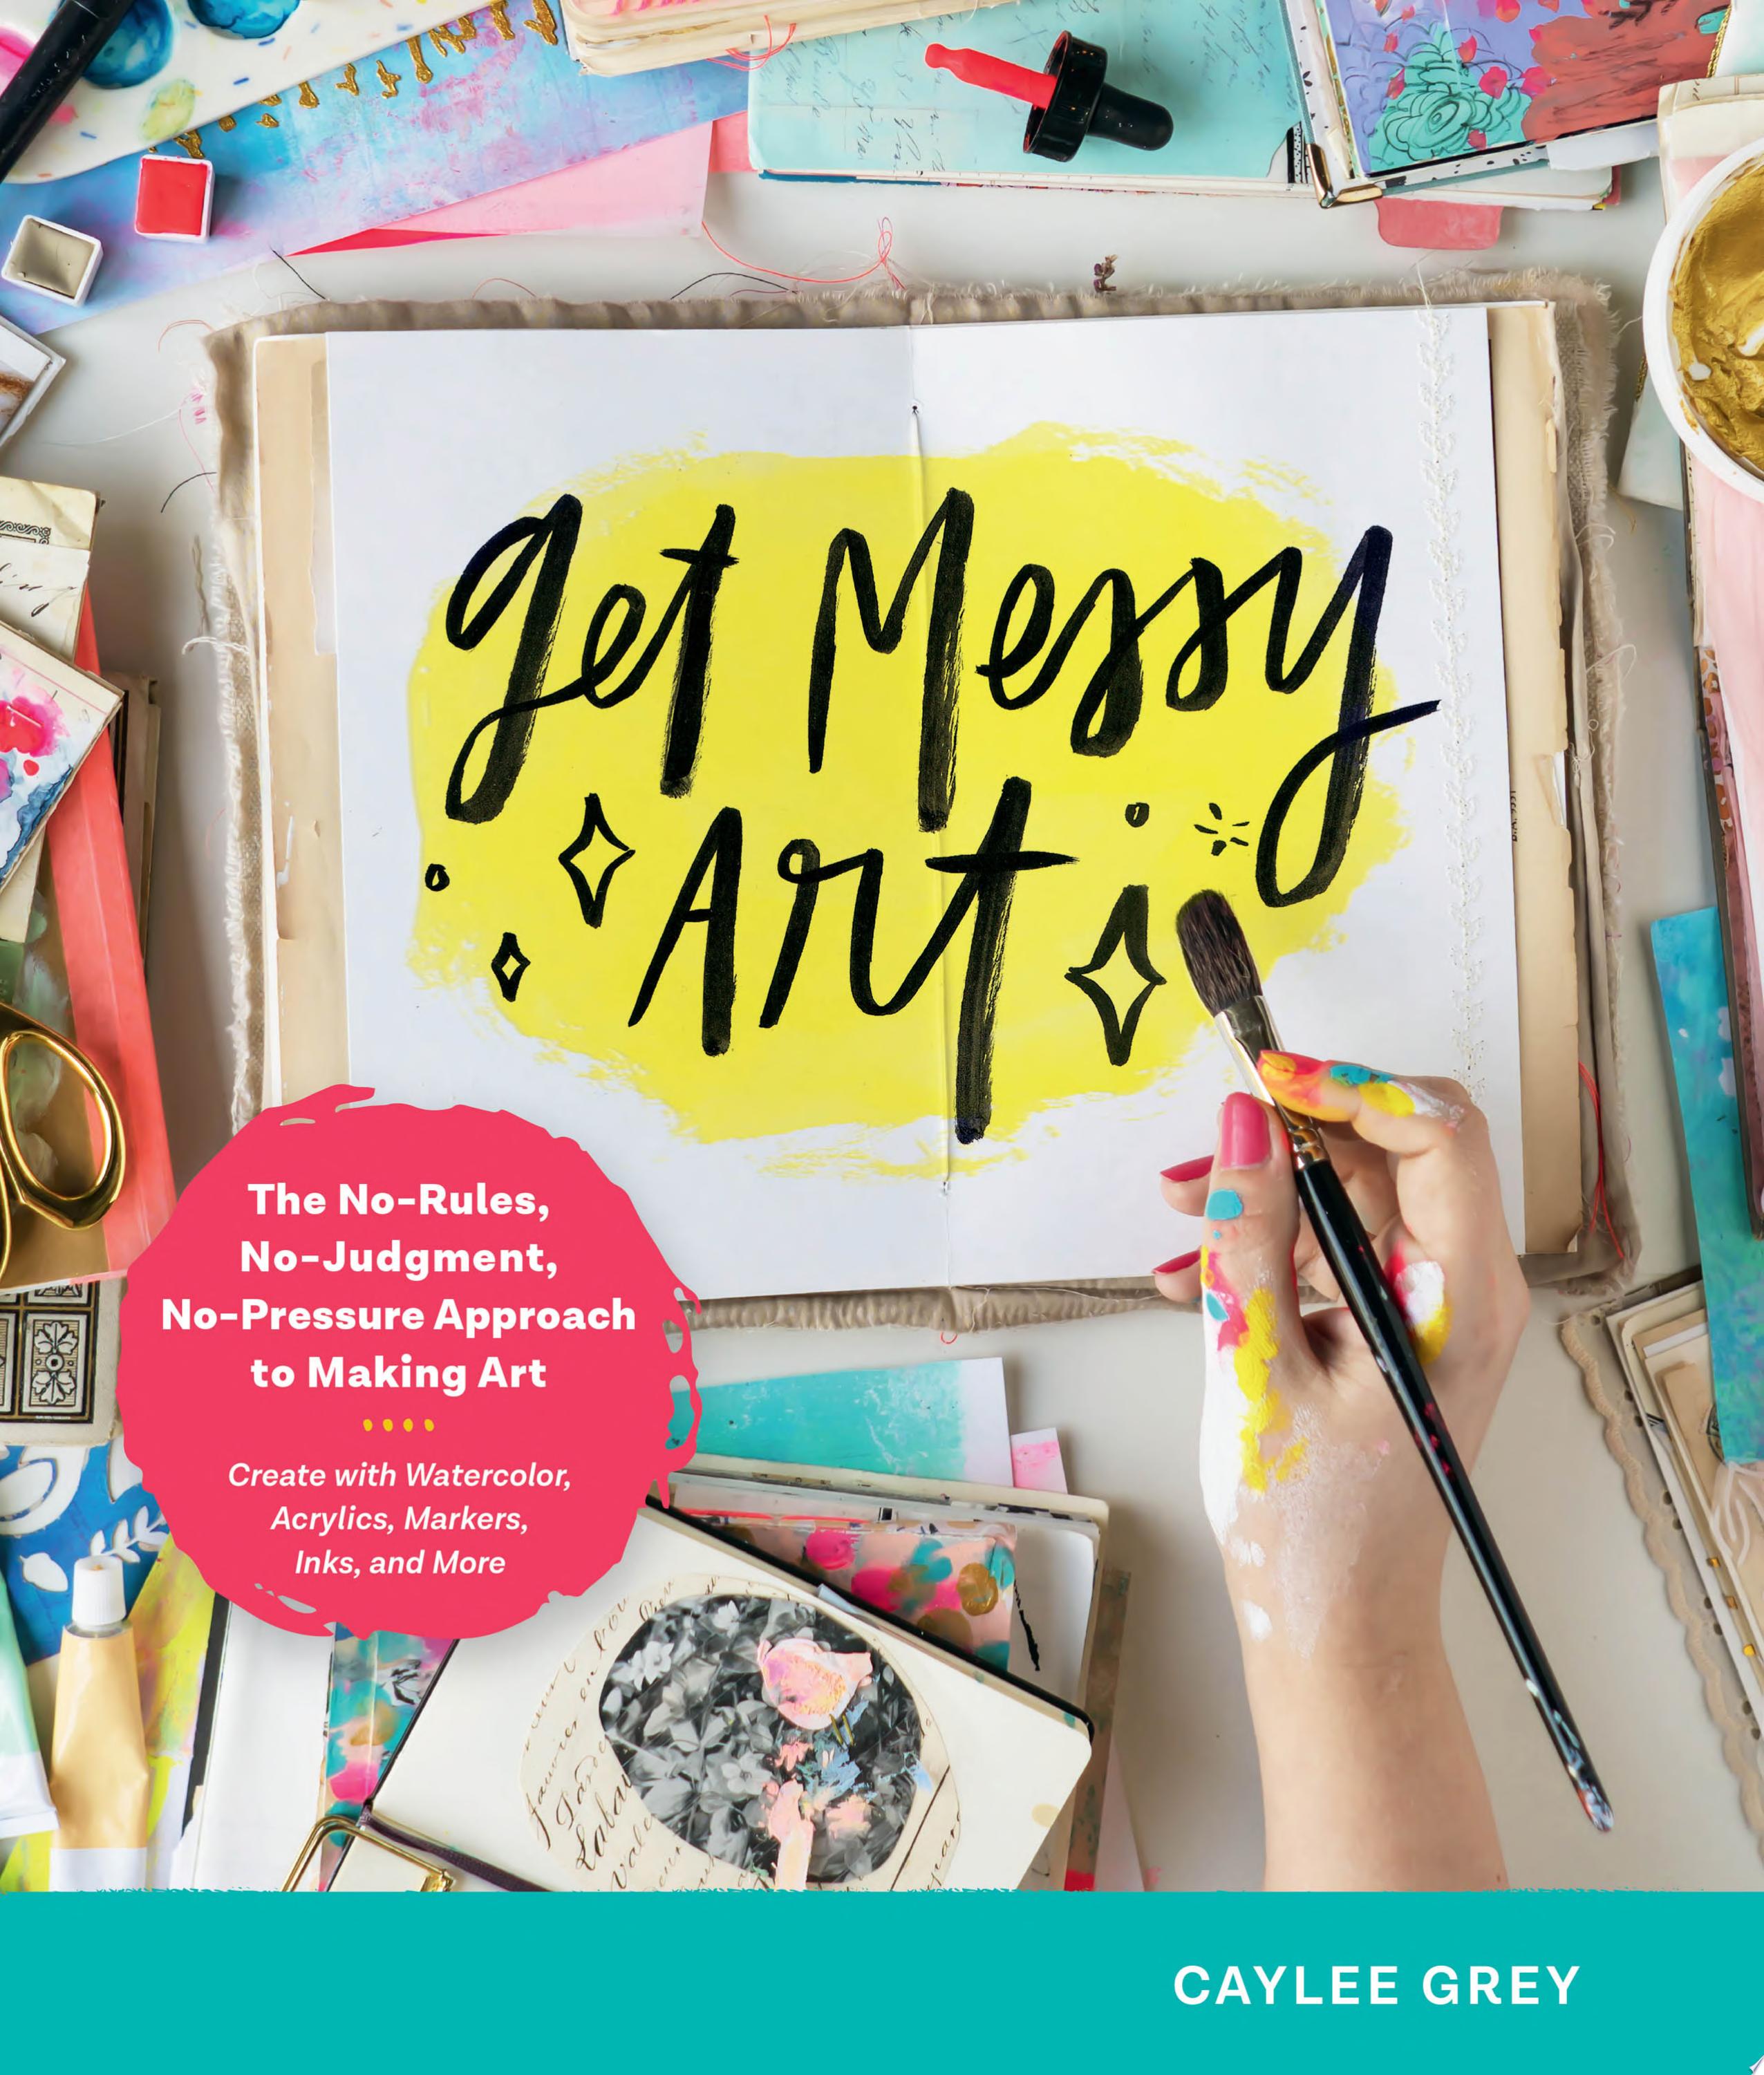 Image for "Get Messy Art"